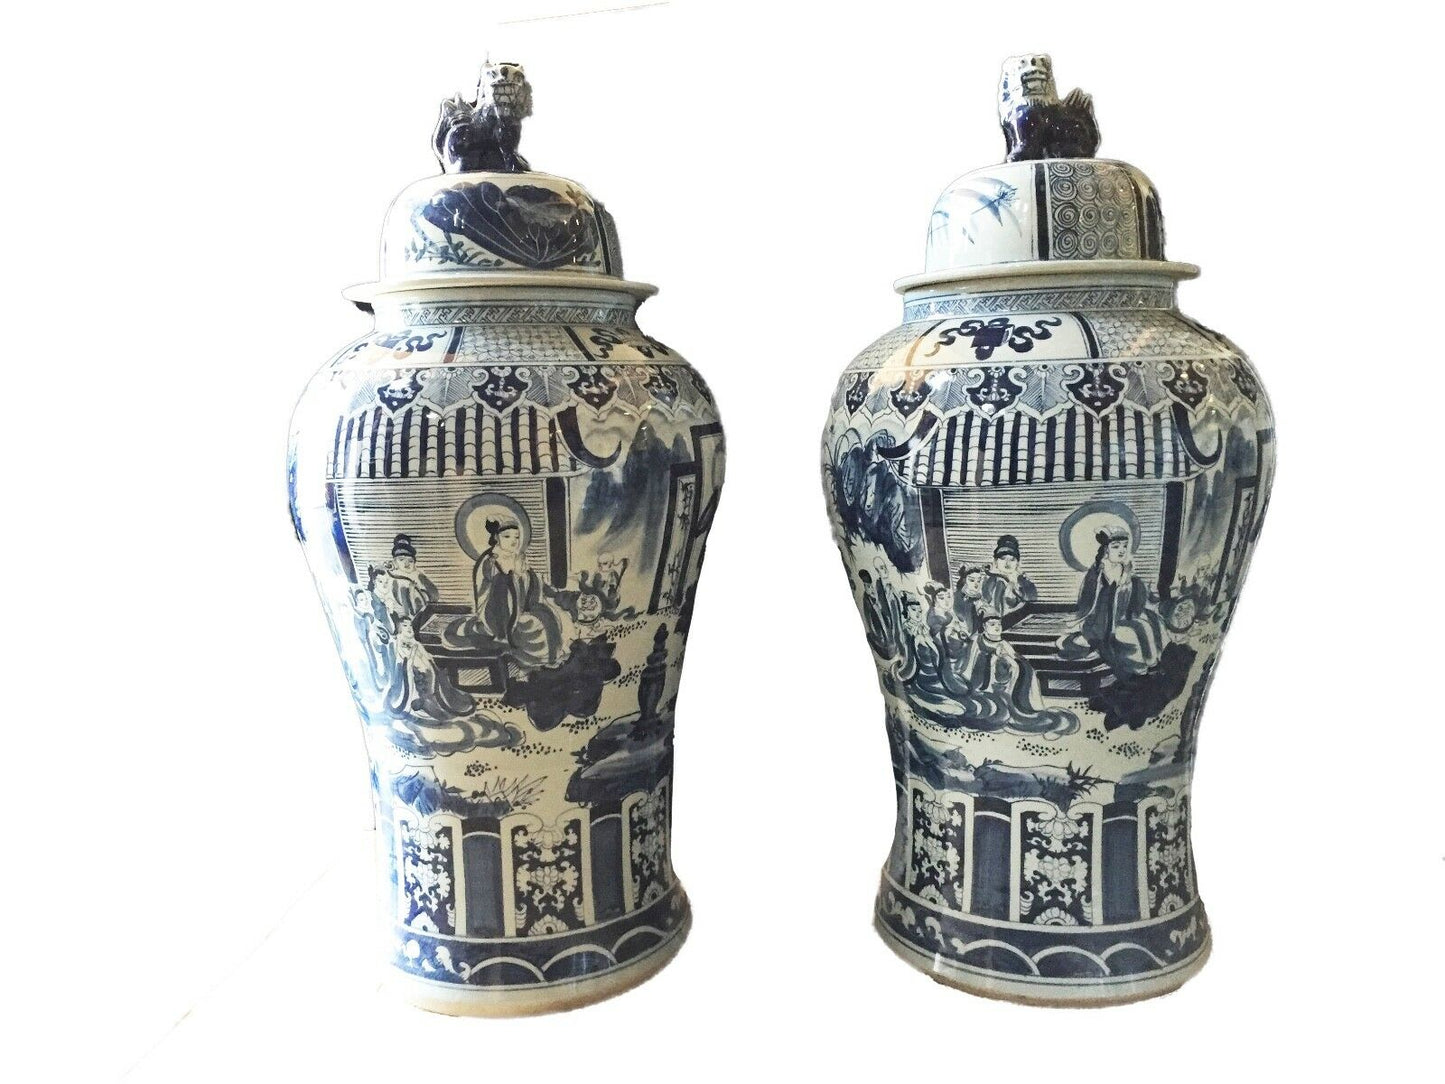 #913 Mansion Size Chinoiserie B & W Porcelain Ginger Jars - a Pair 47" H